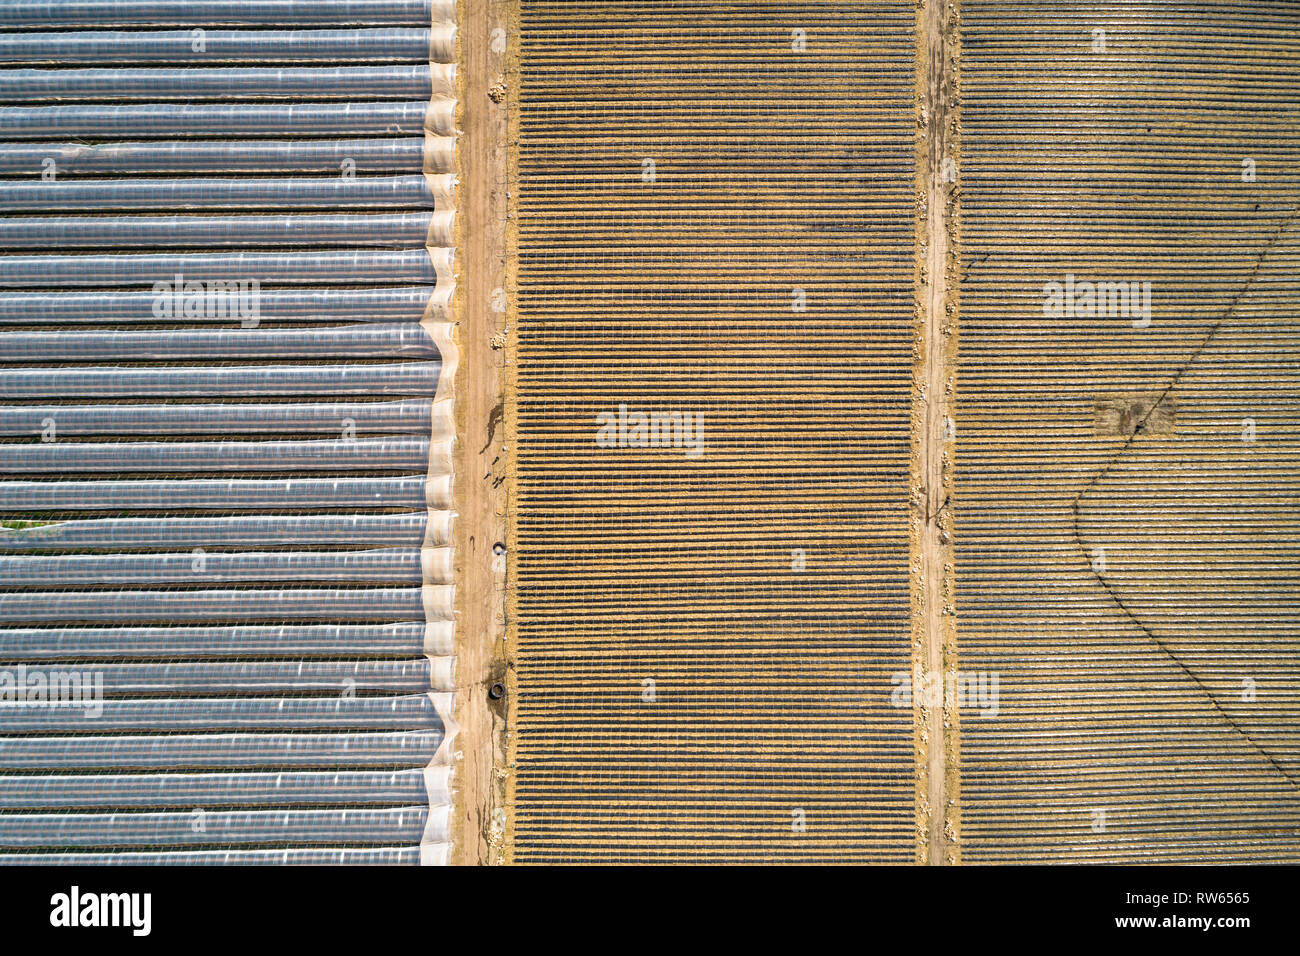 Aerial image showing poly tunnels used for growing soft fruit near Perth, Perthshire, Scotland. Stock Photo